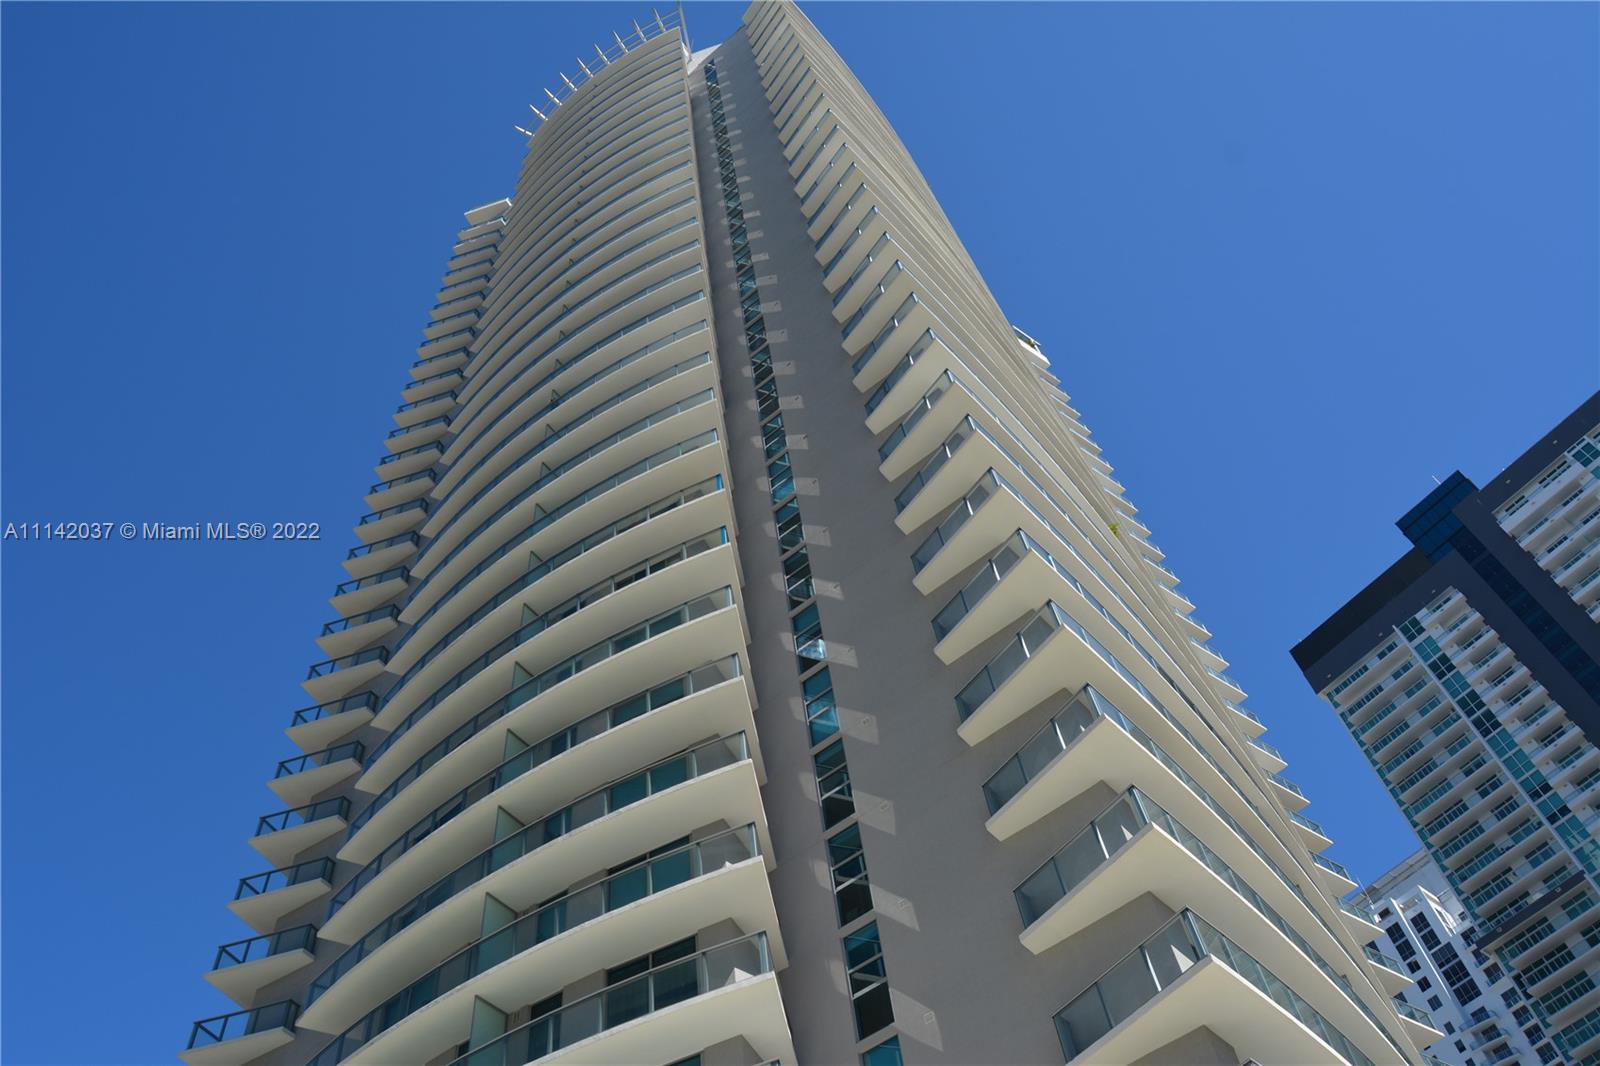 Super bright 1 bed & 1 bath unit at Millecento Brickell. This unit features a spacious floor-plan, floor to ceiling windows, open skyline views with lots of natural light, balcony and Italian cabinetry. Resort Style Amenities include a rooftop pool, larger pool on 9th Floor, Fitness Center, Kids Room, Club Room, theatre and sauna. Washer & dryer inside. Centrally located close to restaurants, shops, supermarkets, Mary Brickell Village, Brickell City Centre, Metrorail & Metromover.